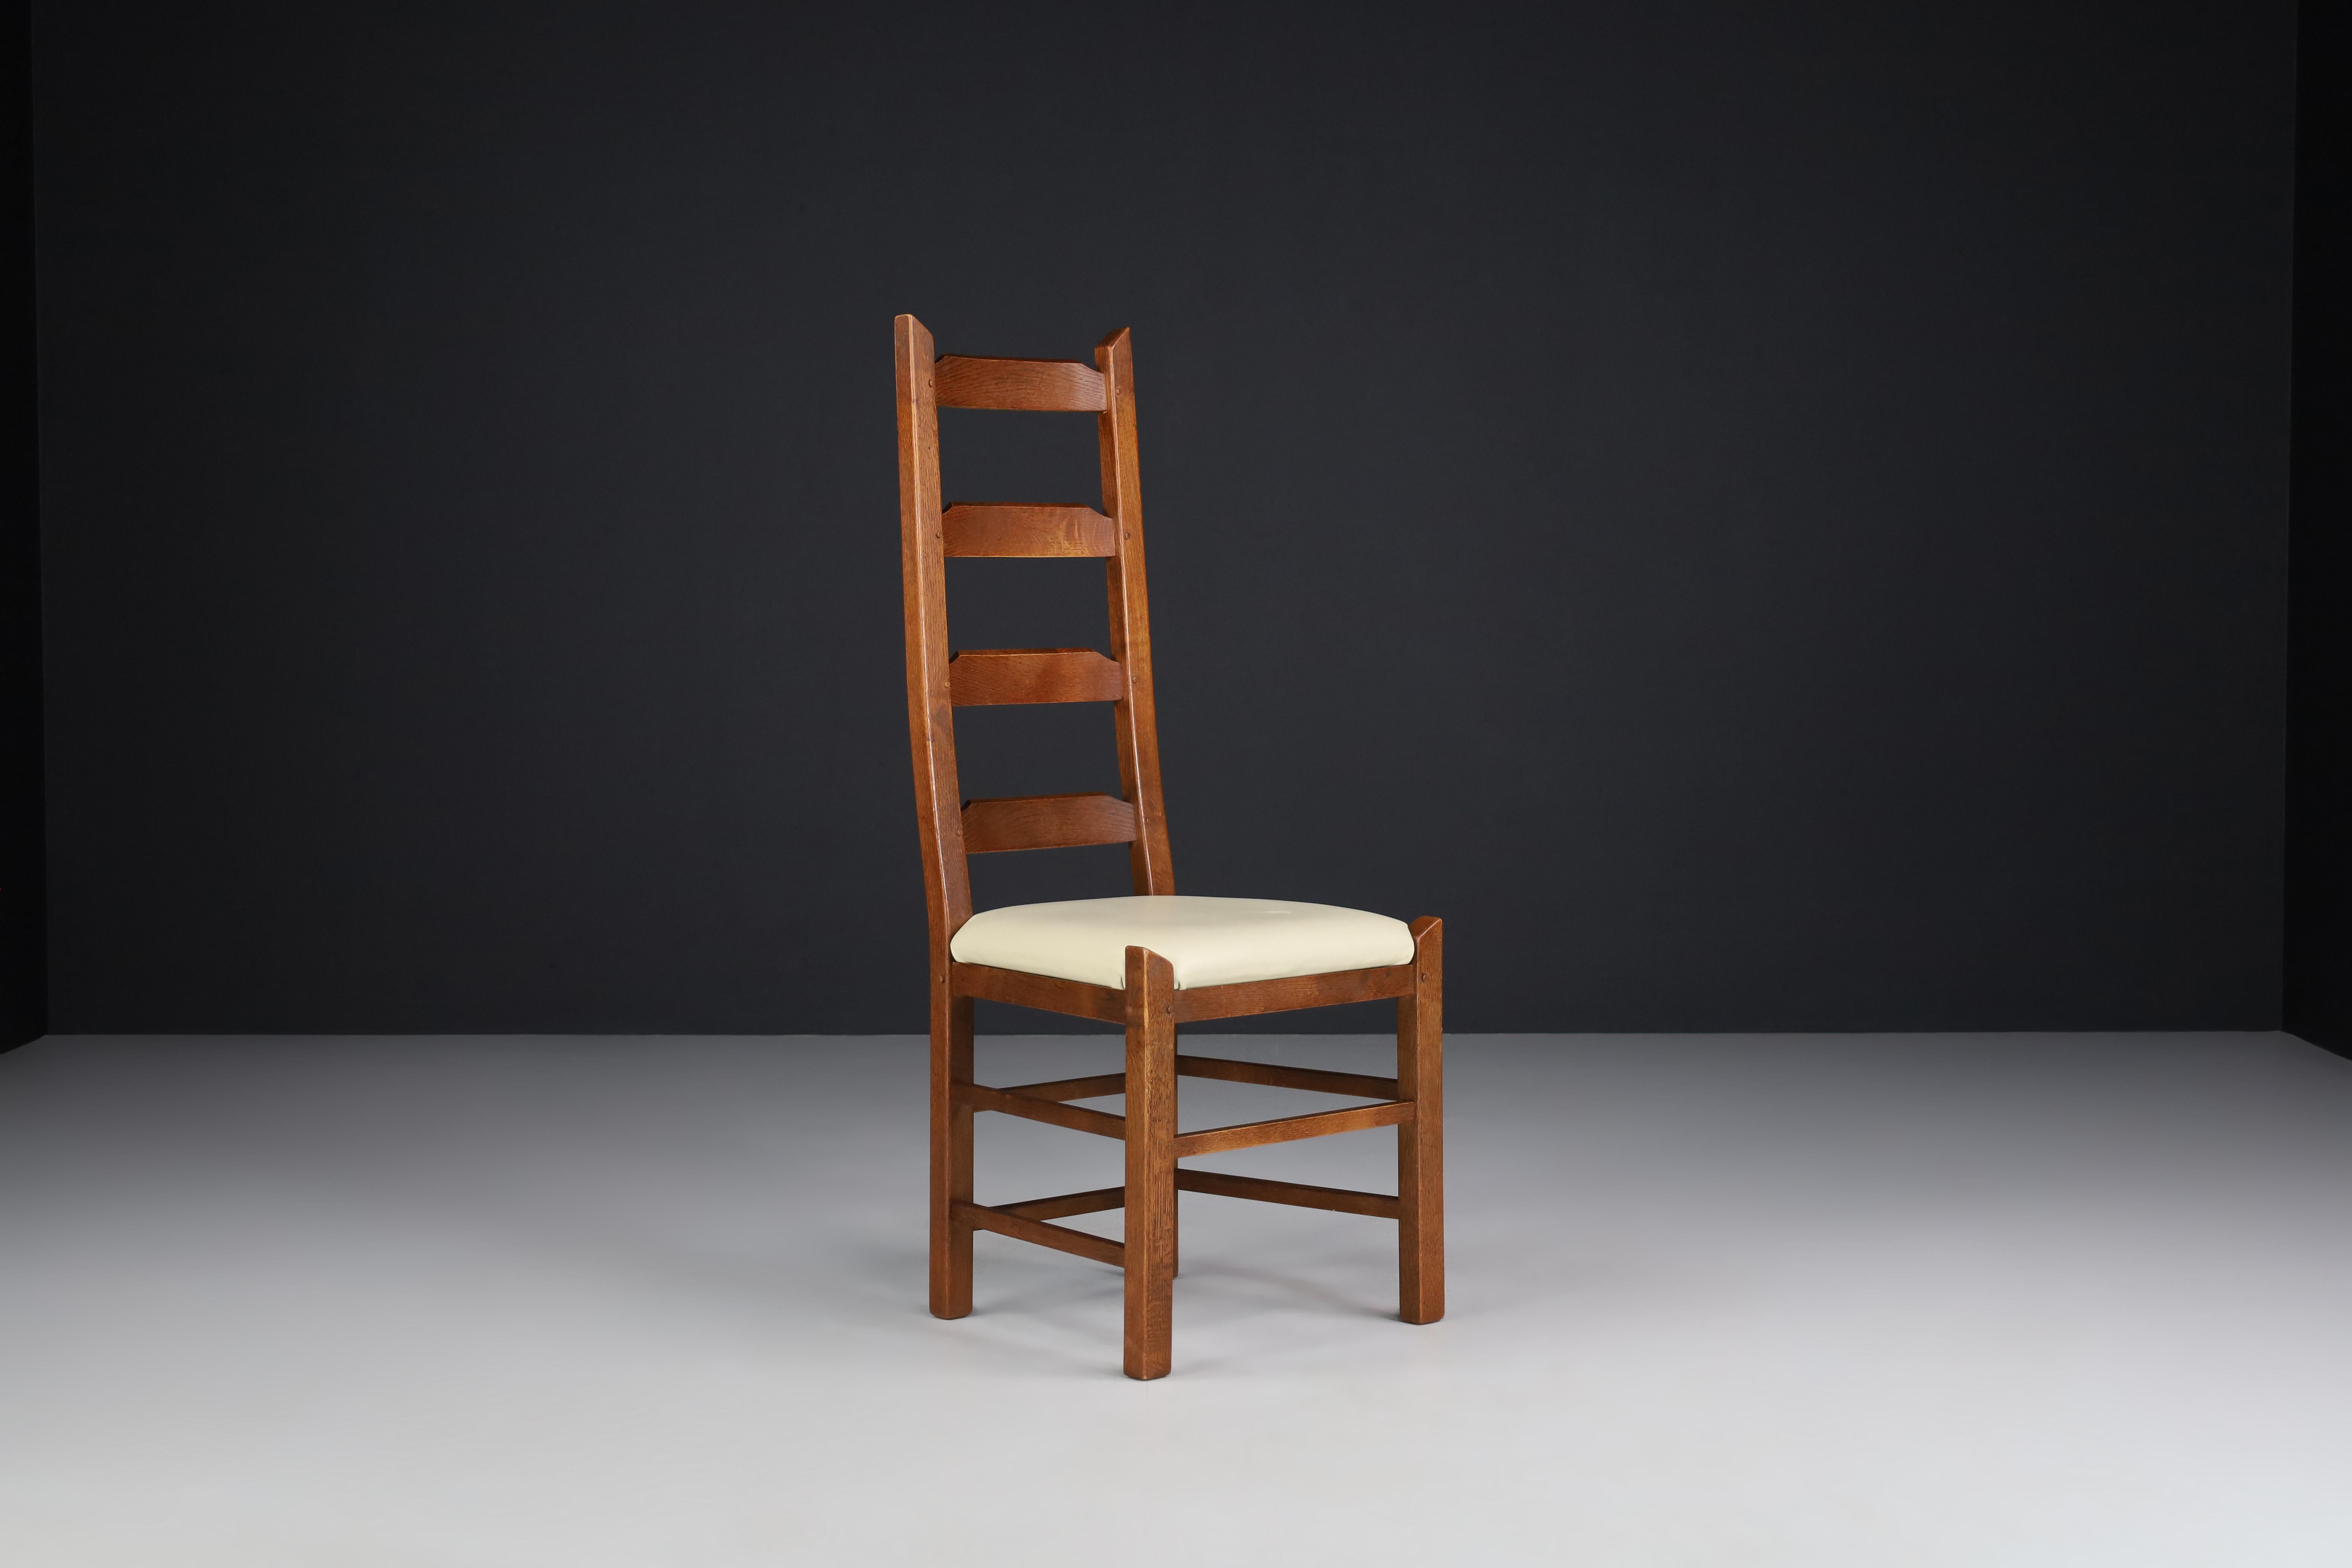 Ladder Back Chairs Crafted in Oak and Leather Seats, France, 1950s For Sale 1